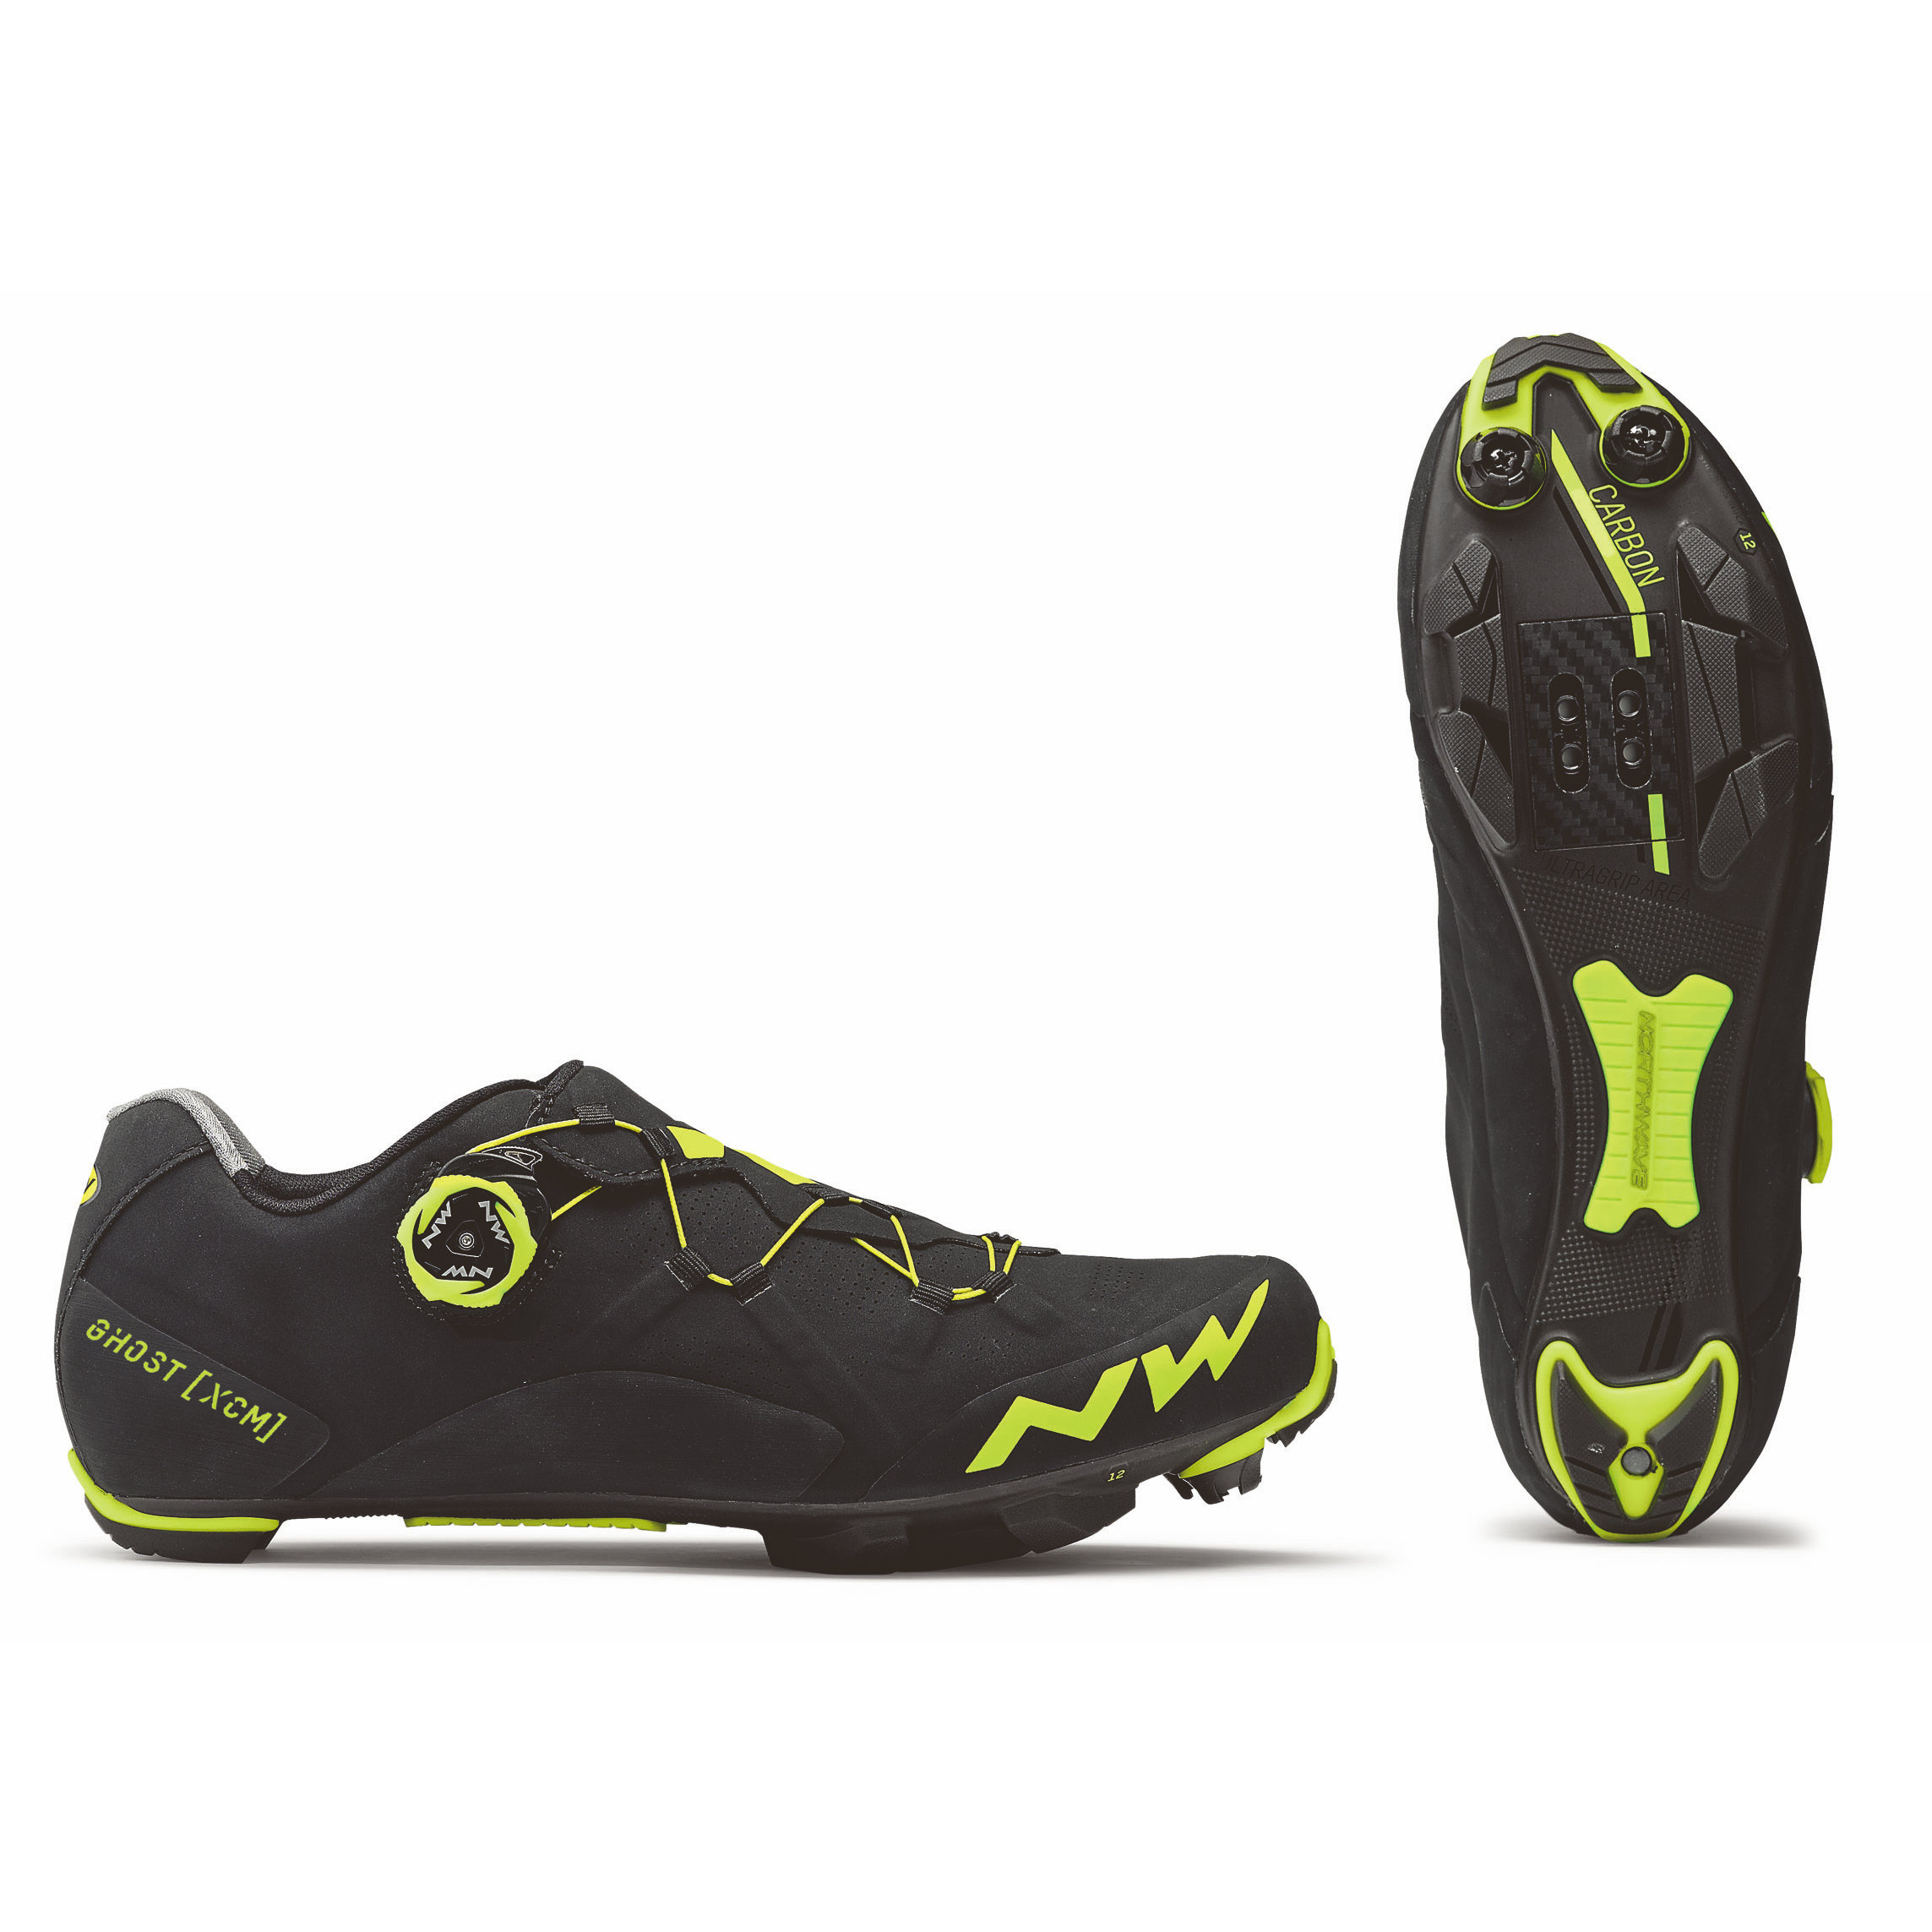 Northwave Ghost XCM MTB Shoes - 2019 